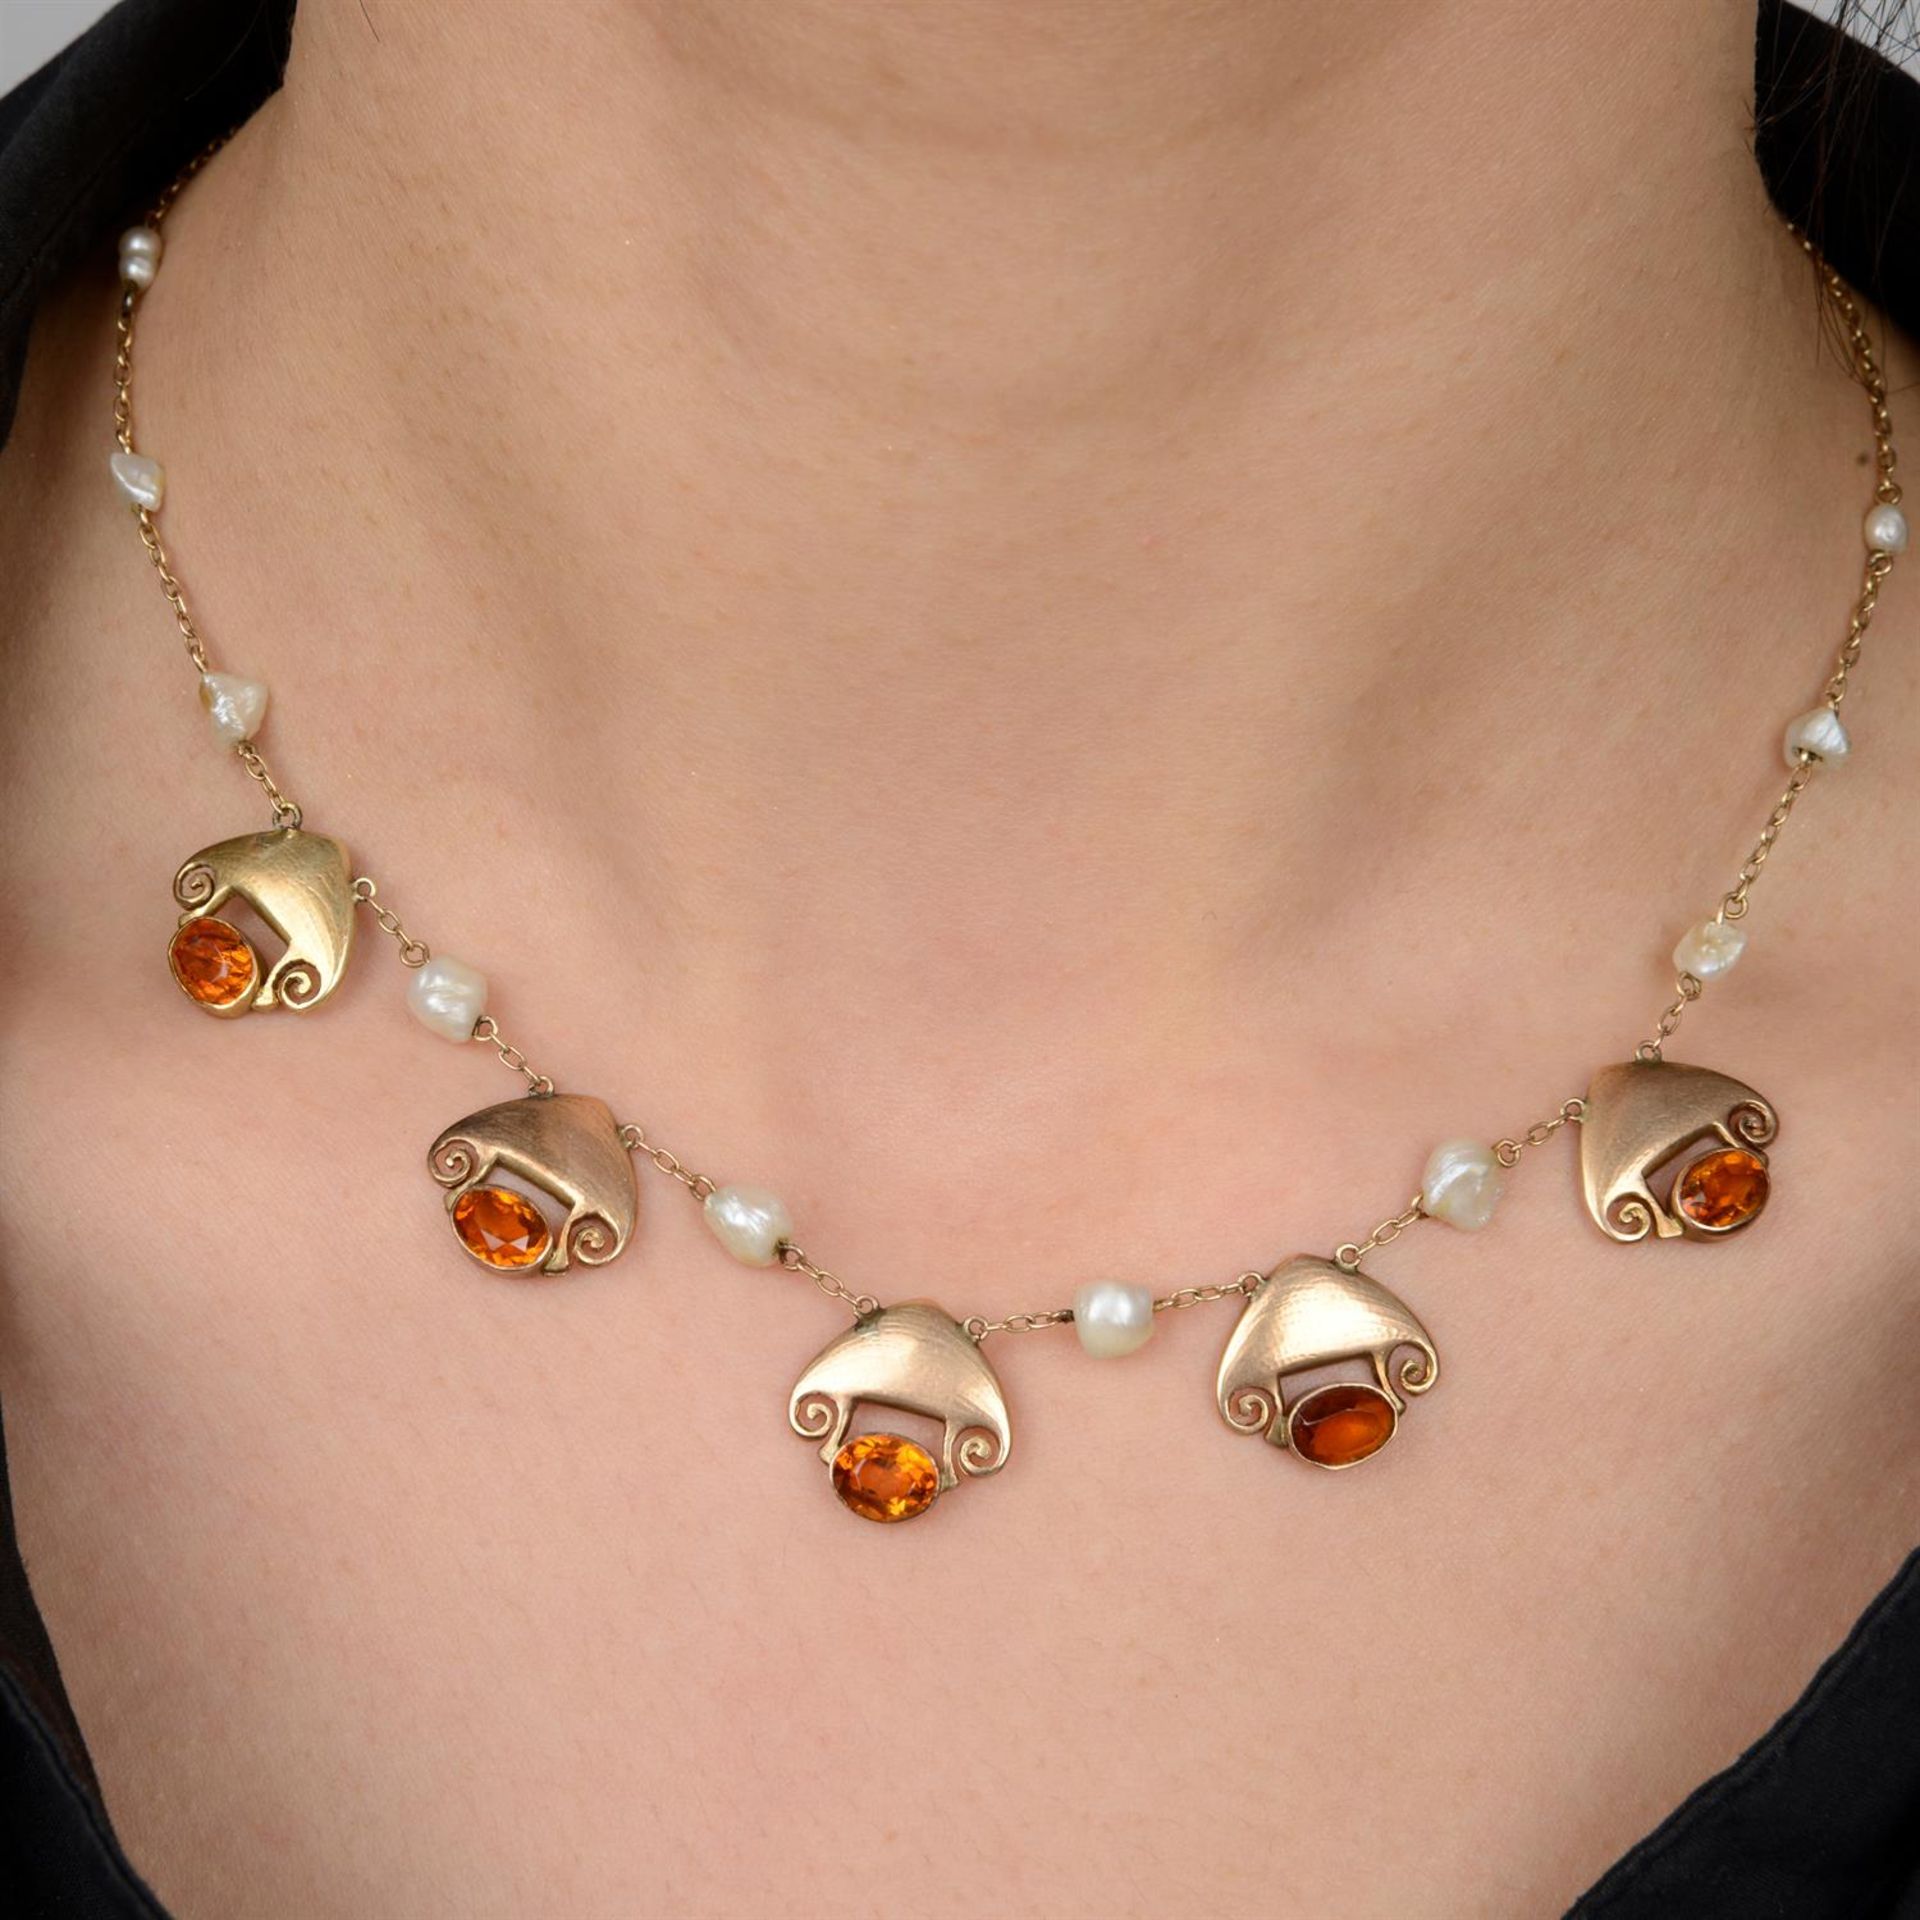 Citrine and baroque pearl necklace, by Liberty & Co. - Image 6 of 6